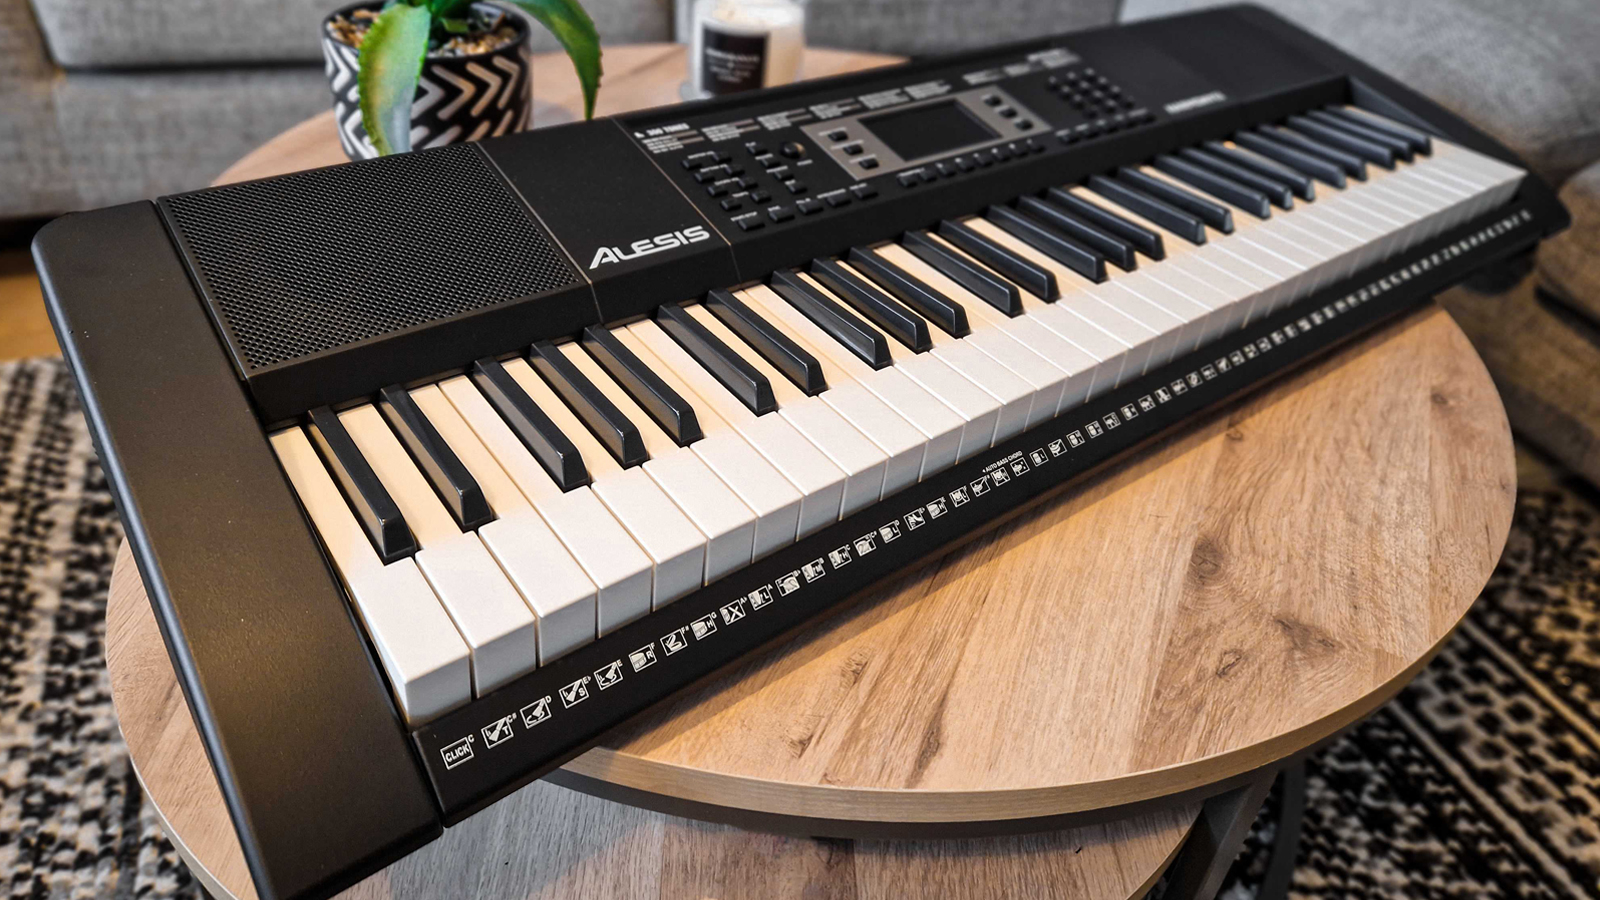 NEW Alesis Melody 61 MKII, 61-Key Portable Keyboard with Built-In Speakers